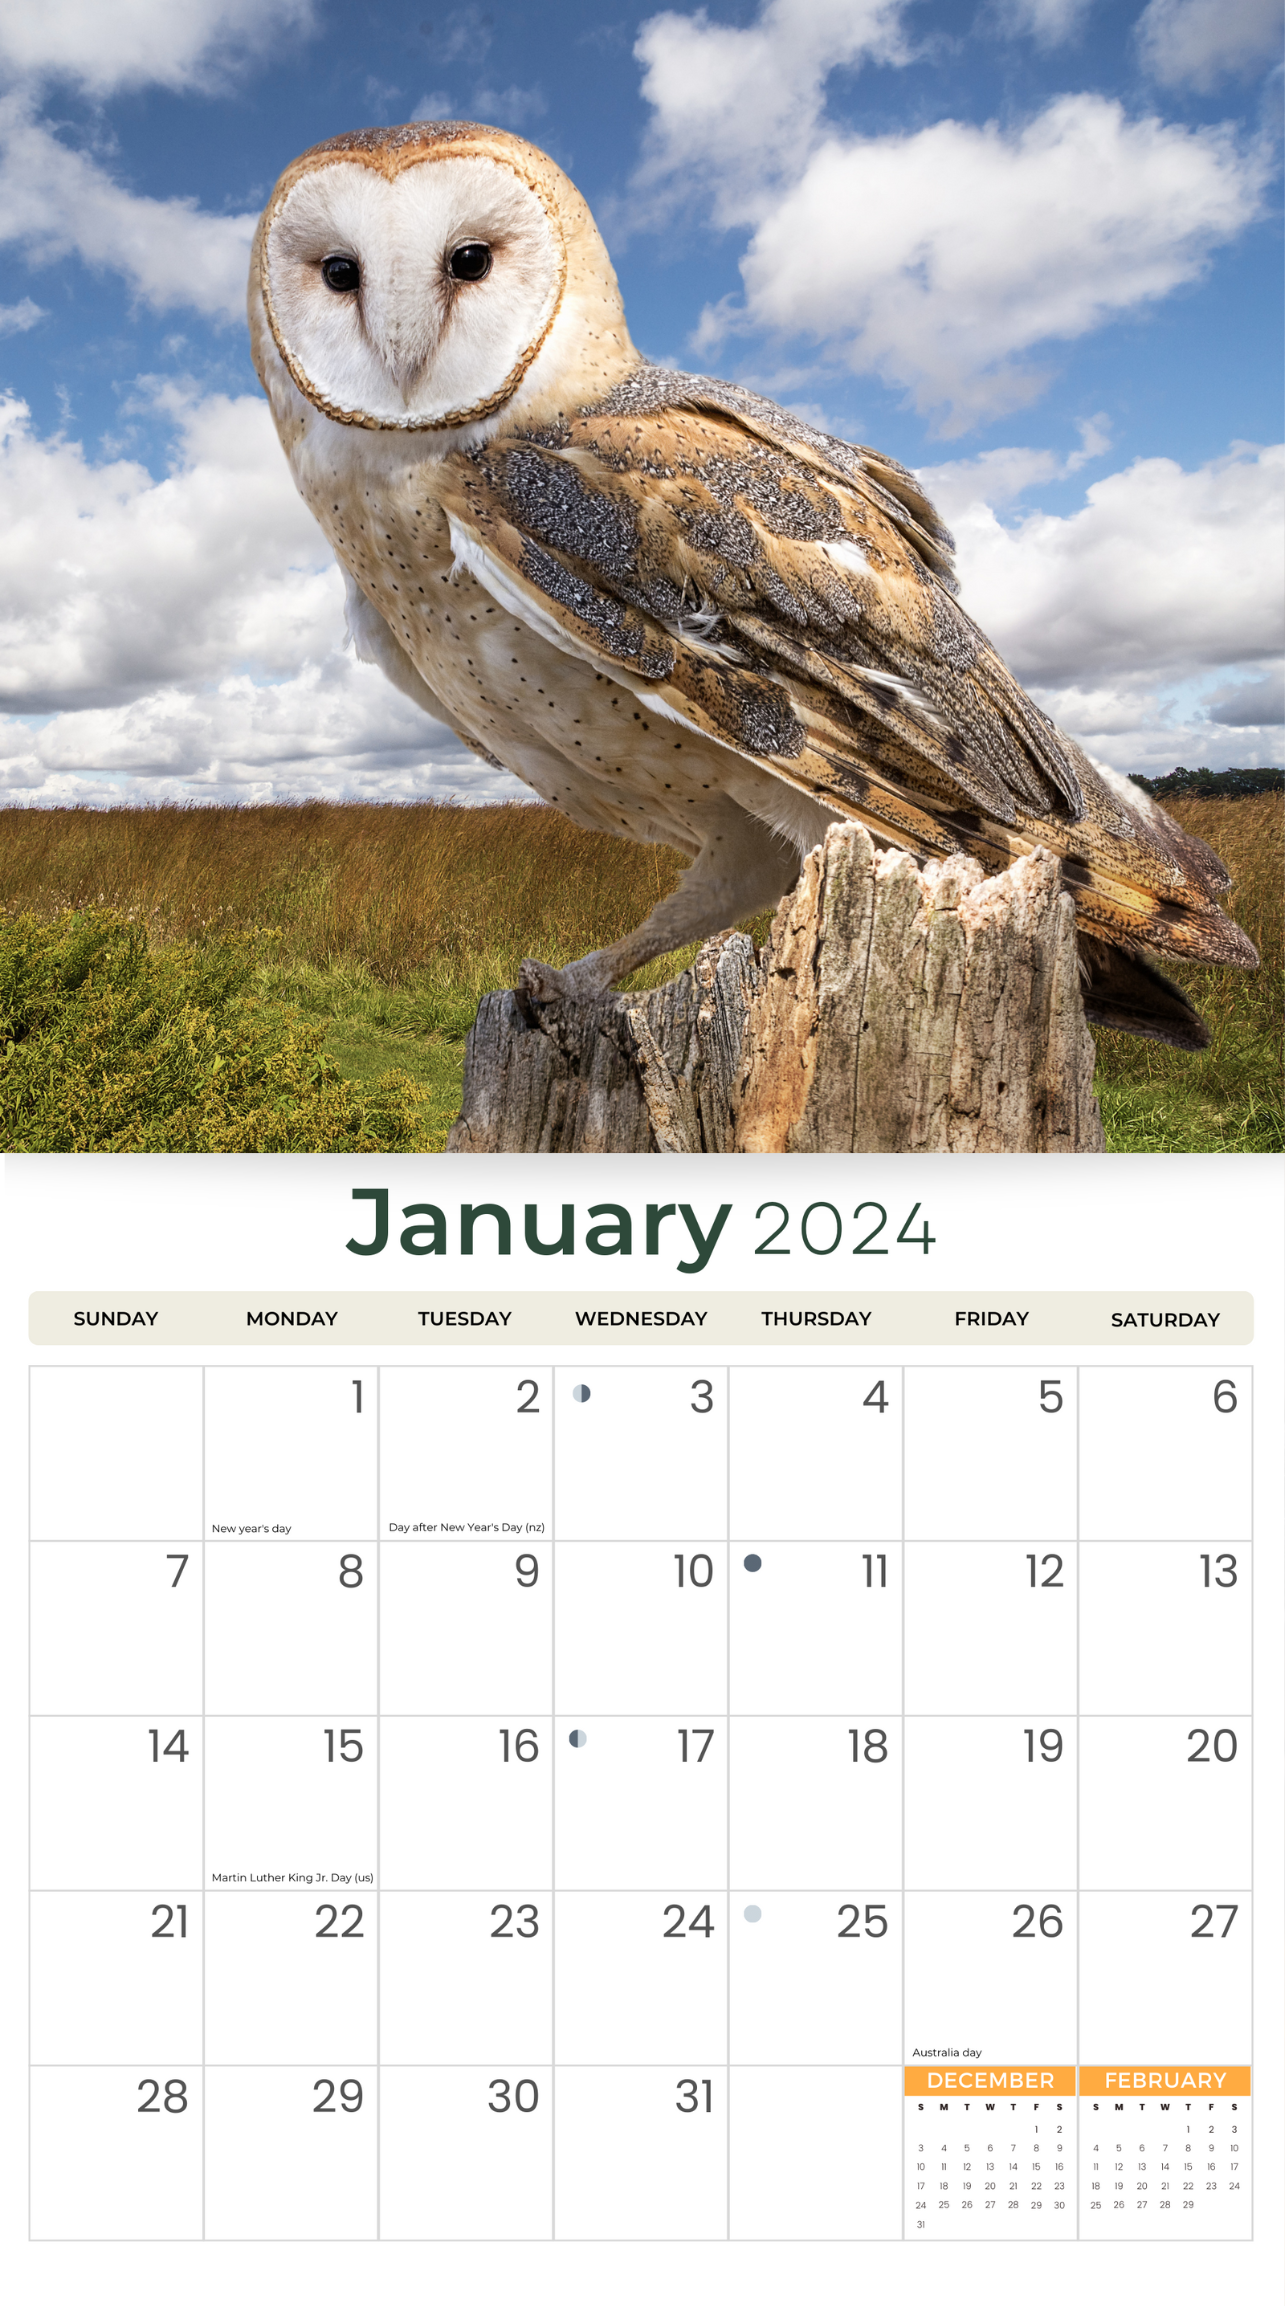 2024 Owls - Deluxe Wall Calendar by Just Calendars - 16 Month - Plastic Free